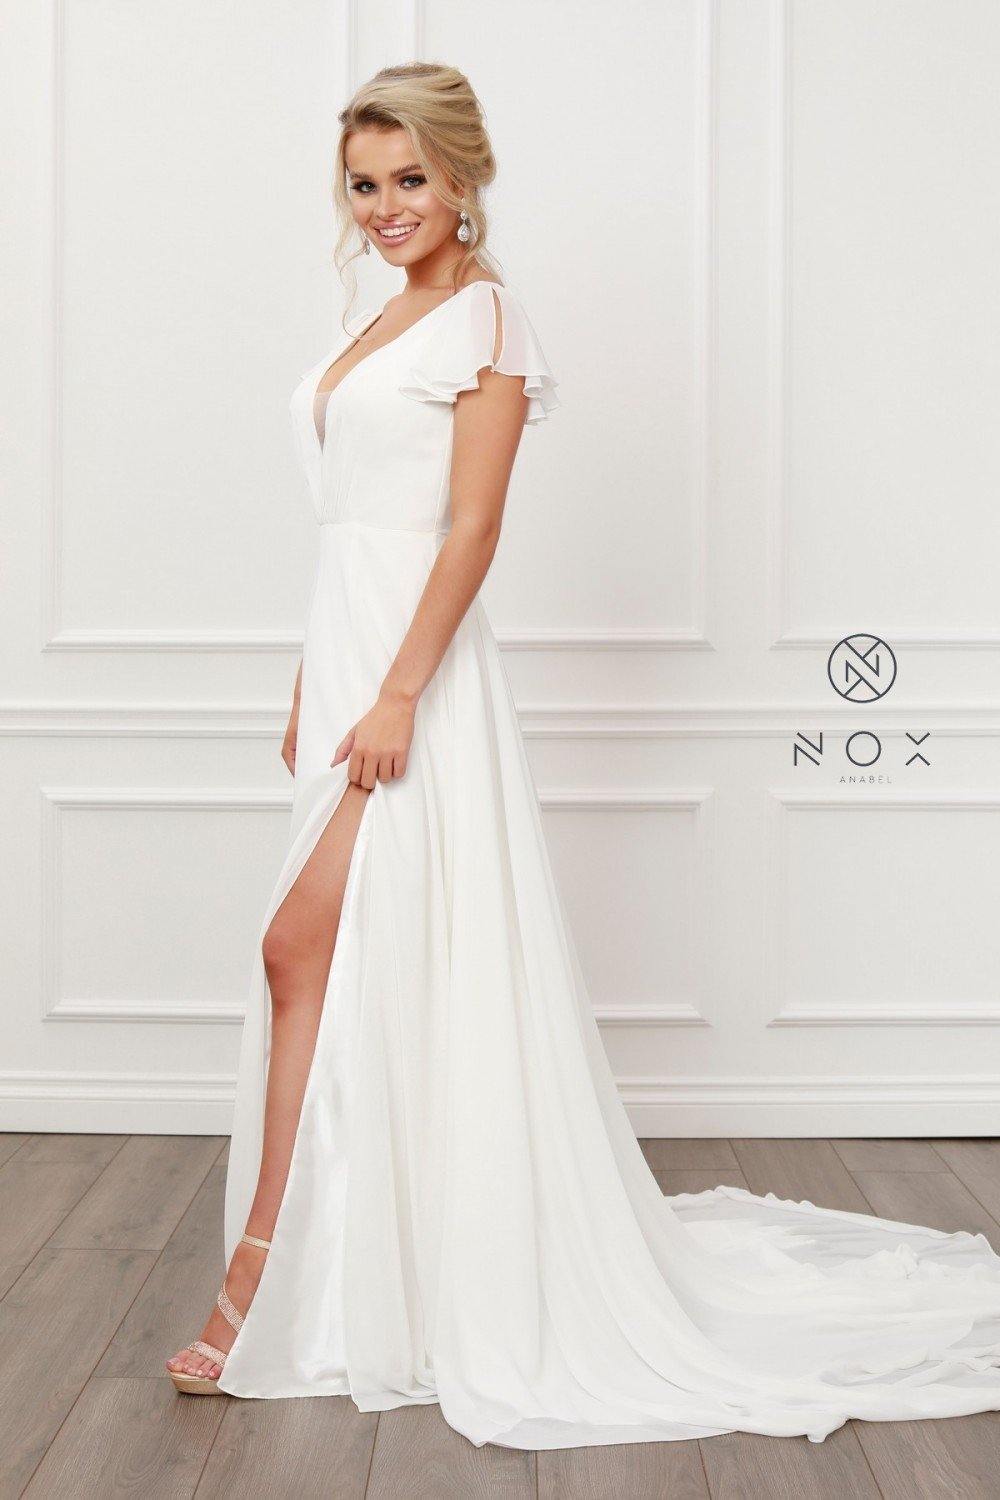 Long Flowy Boho Wedding Gown - The Dress Outlet